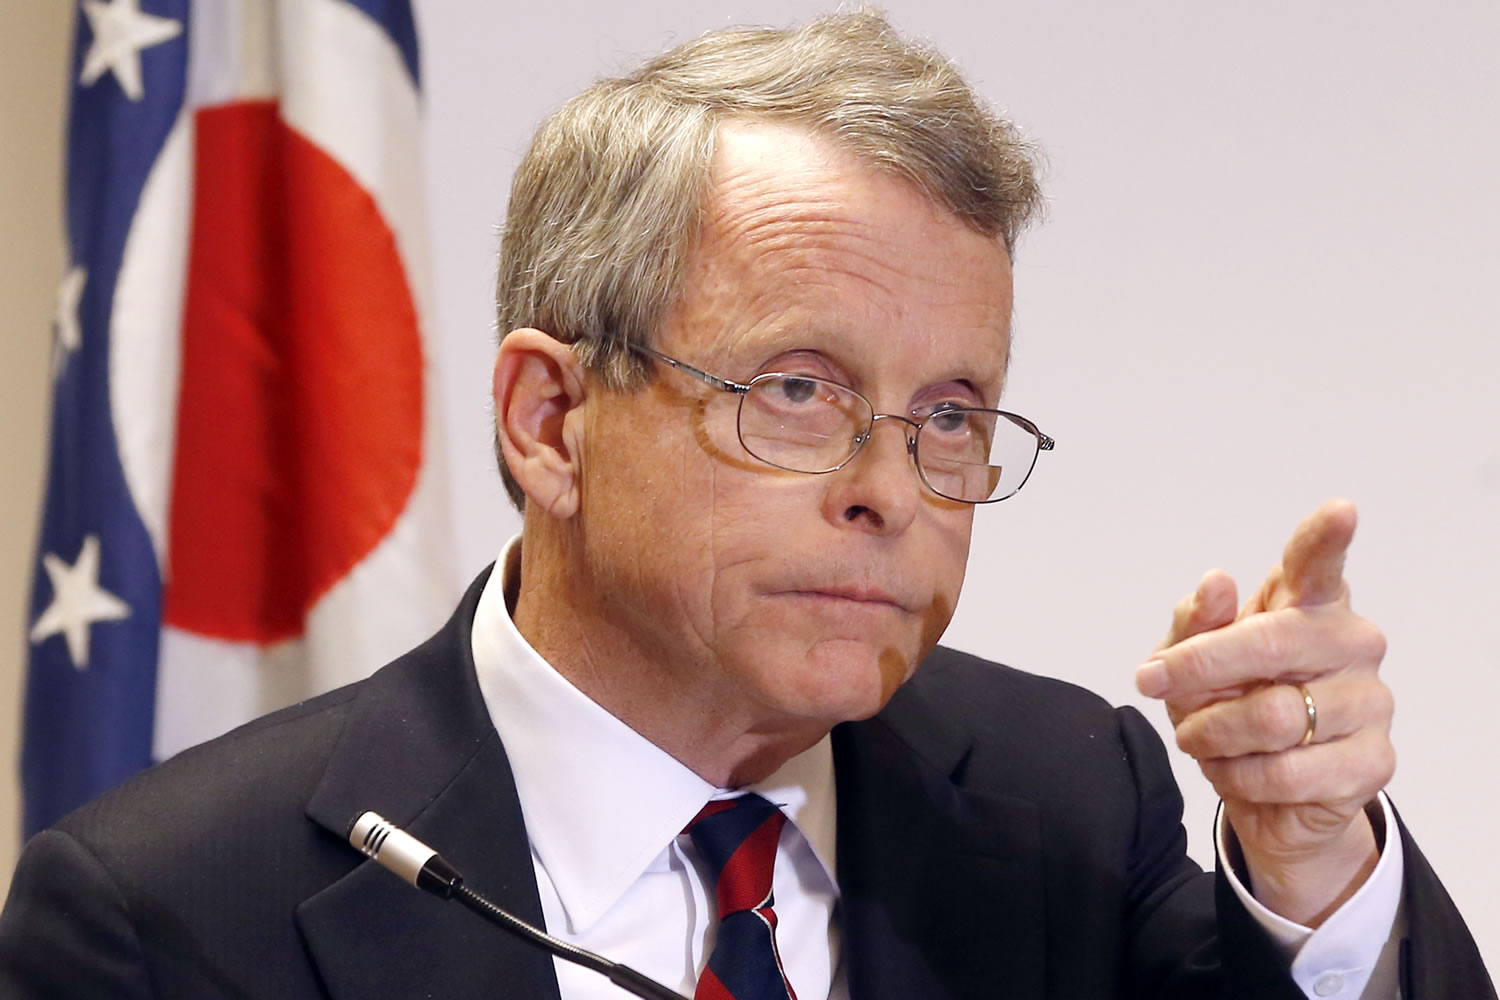 FILE - In this Monday, Nov. 25, 2013 file photo, Ohio Attorney General Mike DeWine answers questions during a news conference in Steubenville, Ohio. Attorney General Mike DeWine on Friday, Dec. 11, 2015, criticized the agency for disposing of fetal remains in landfills.